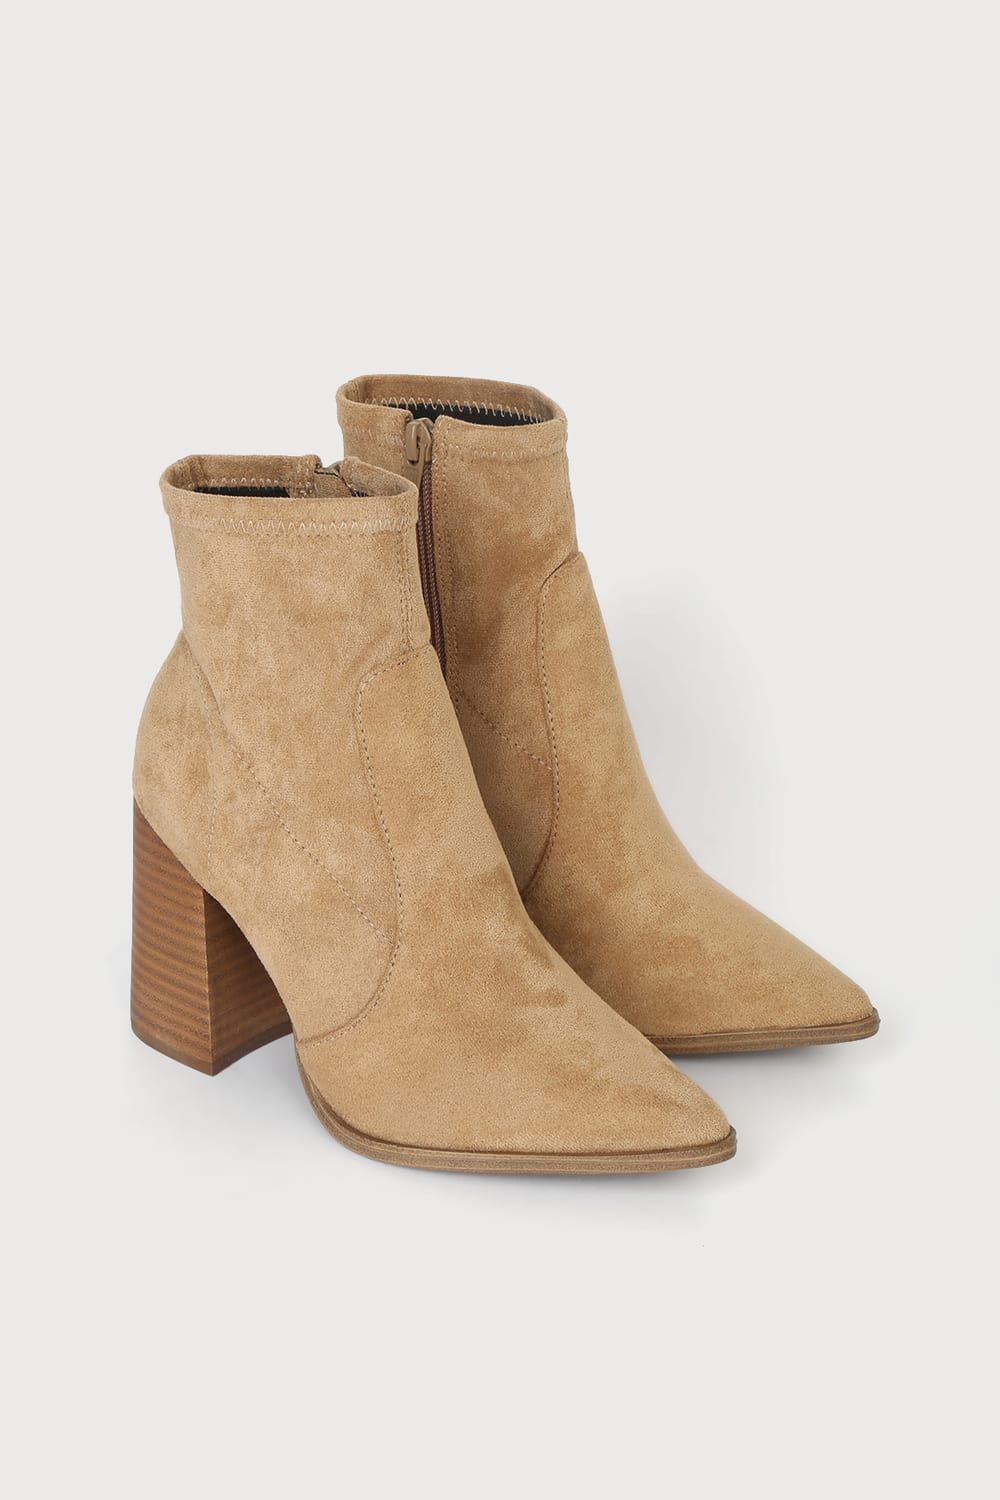 Touchdown Tan Suede Pointed-Toe Booties | Lulus (US)